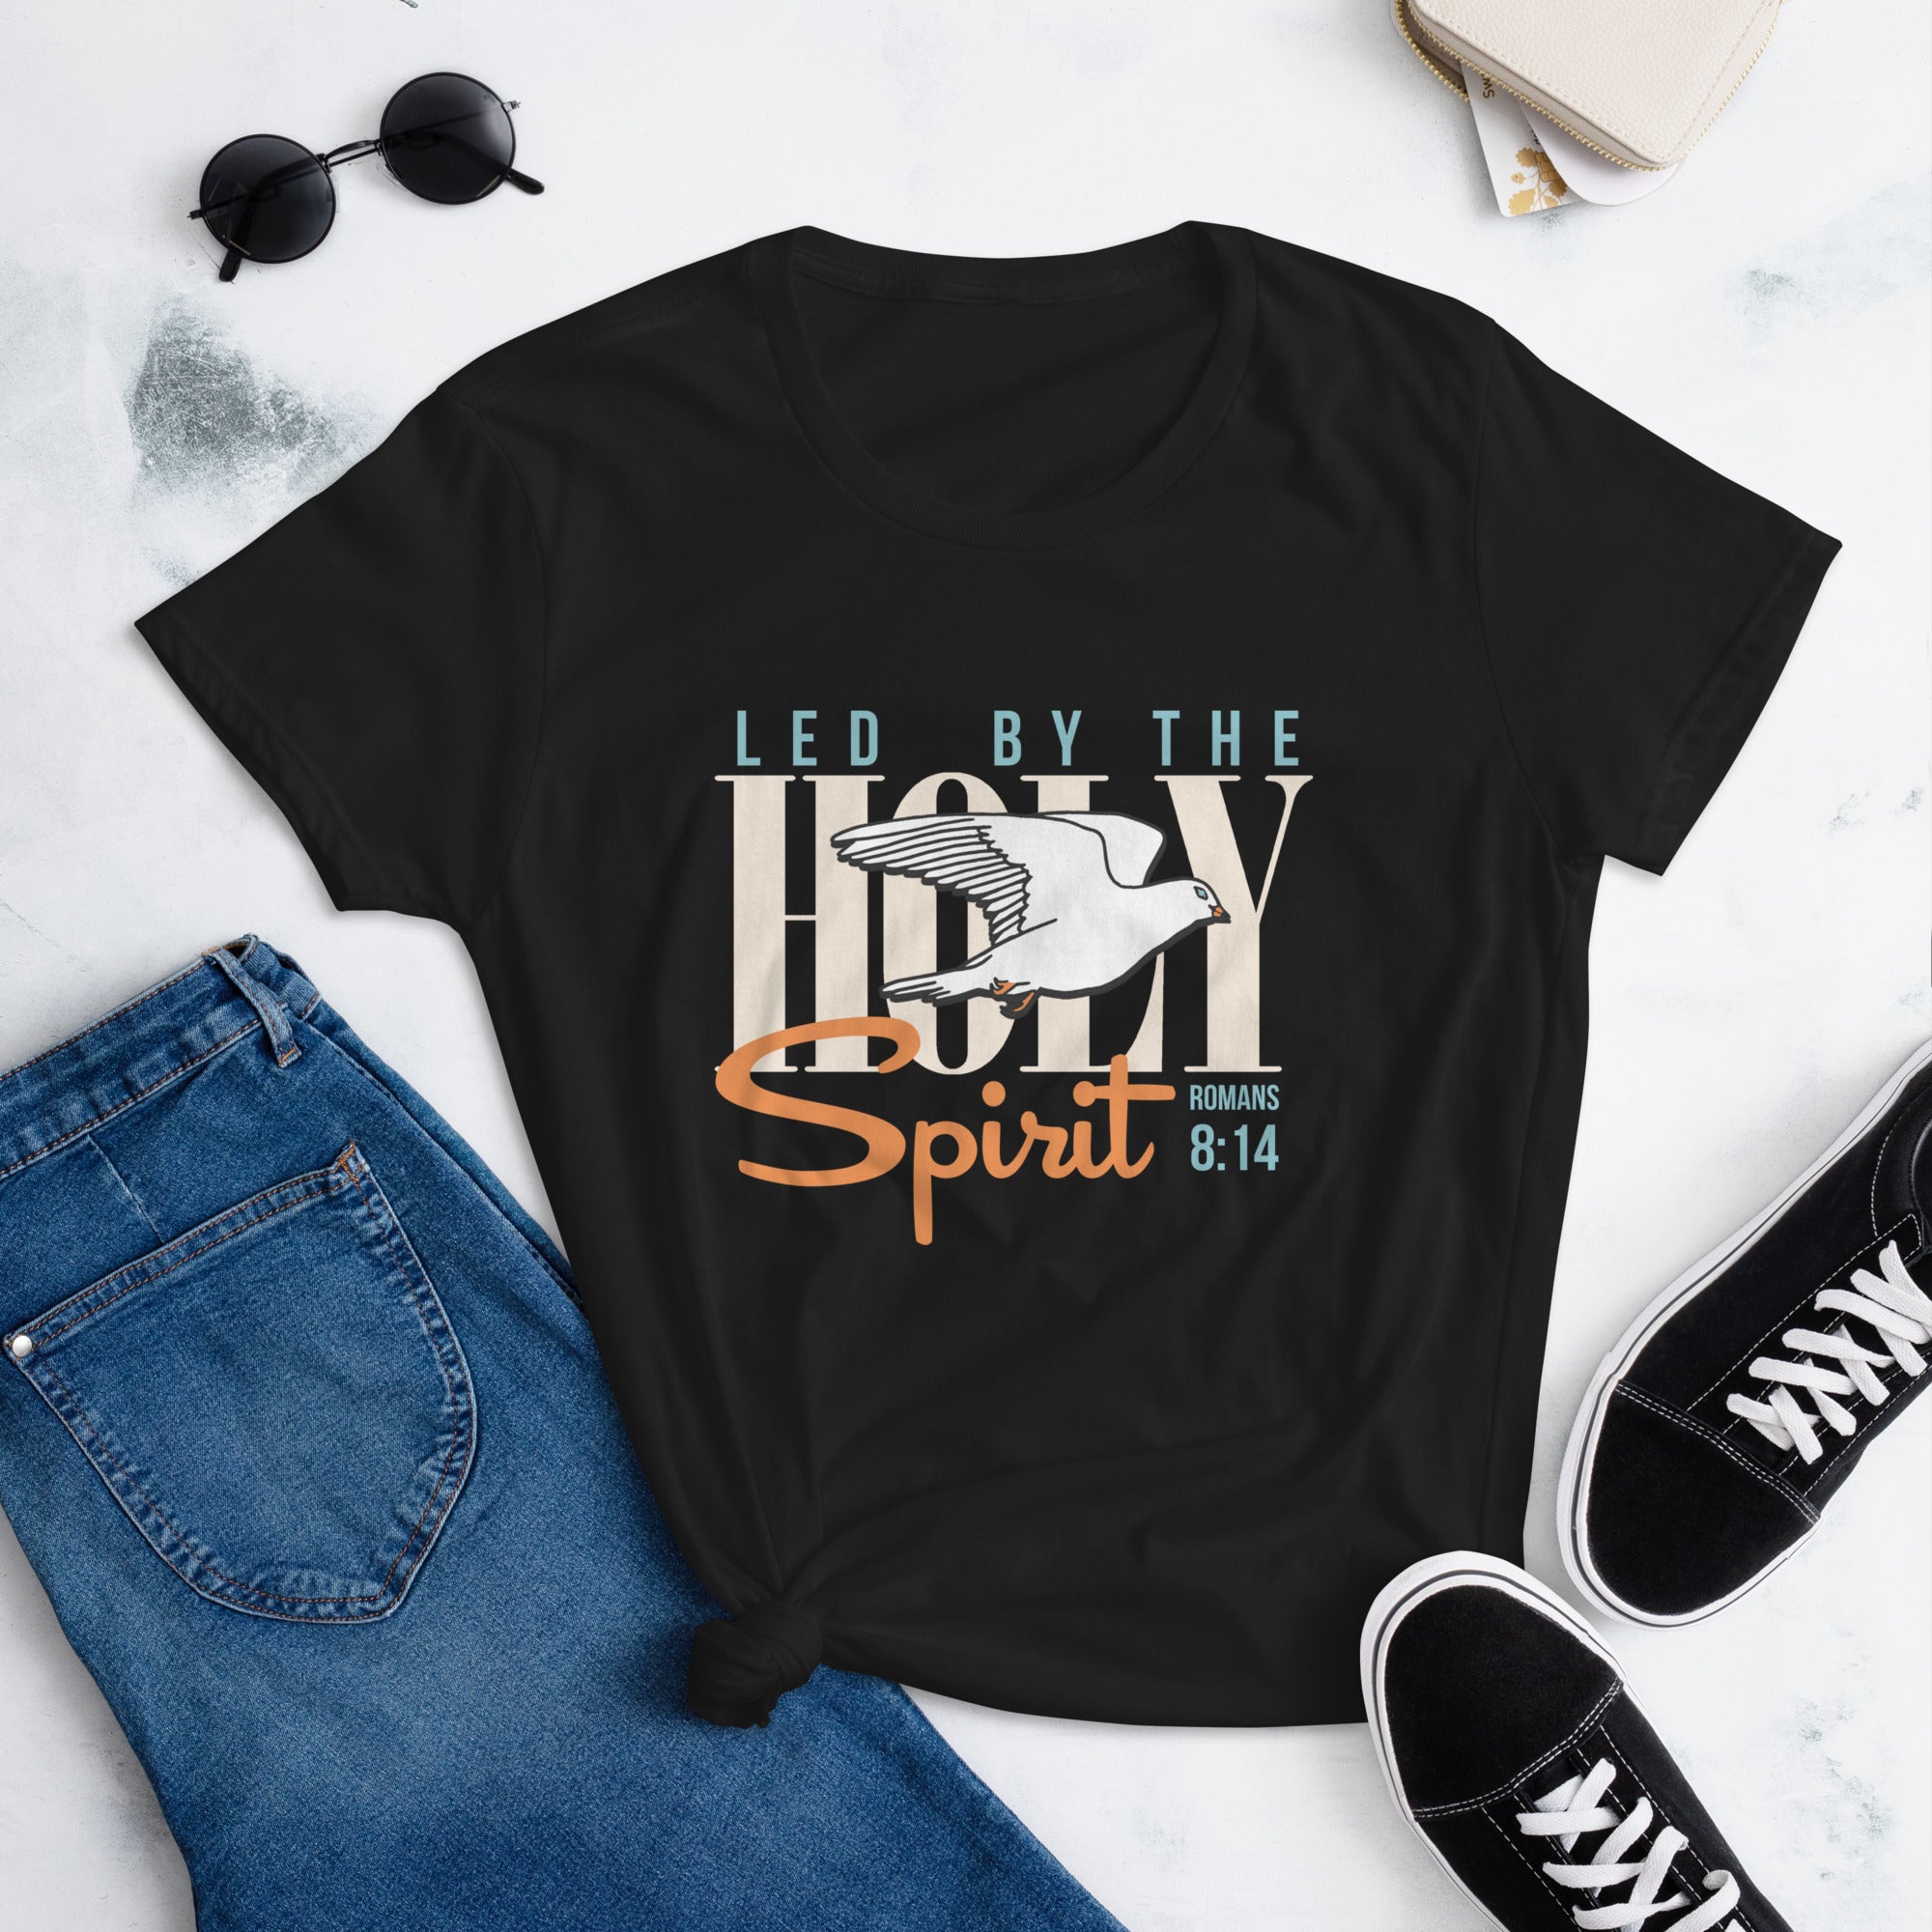 Led by the Holy Spirit